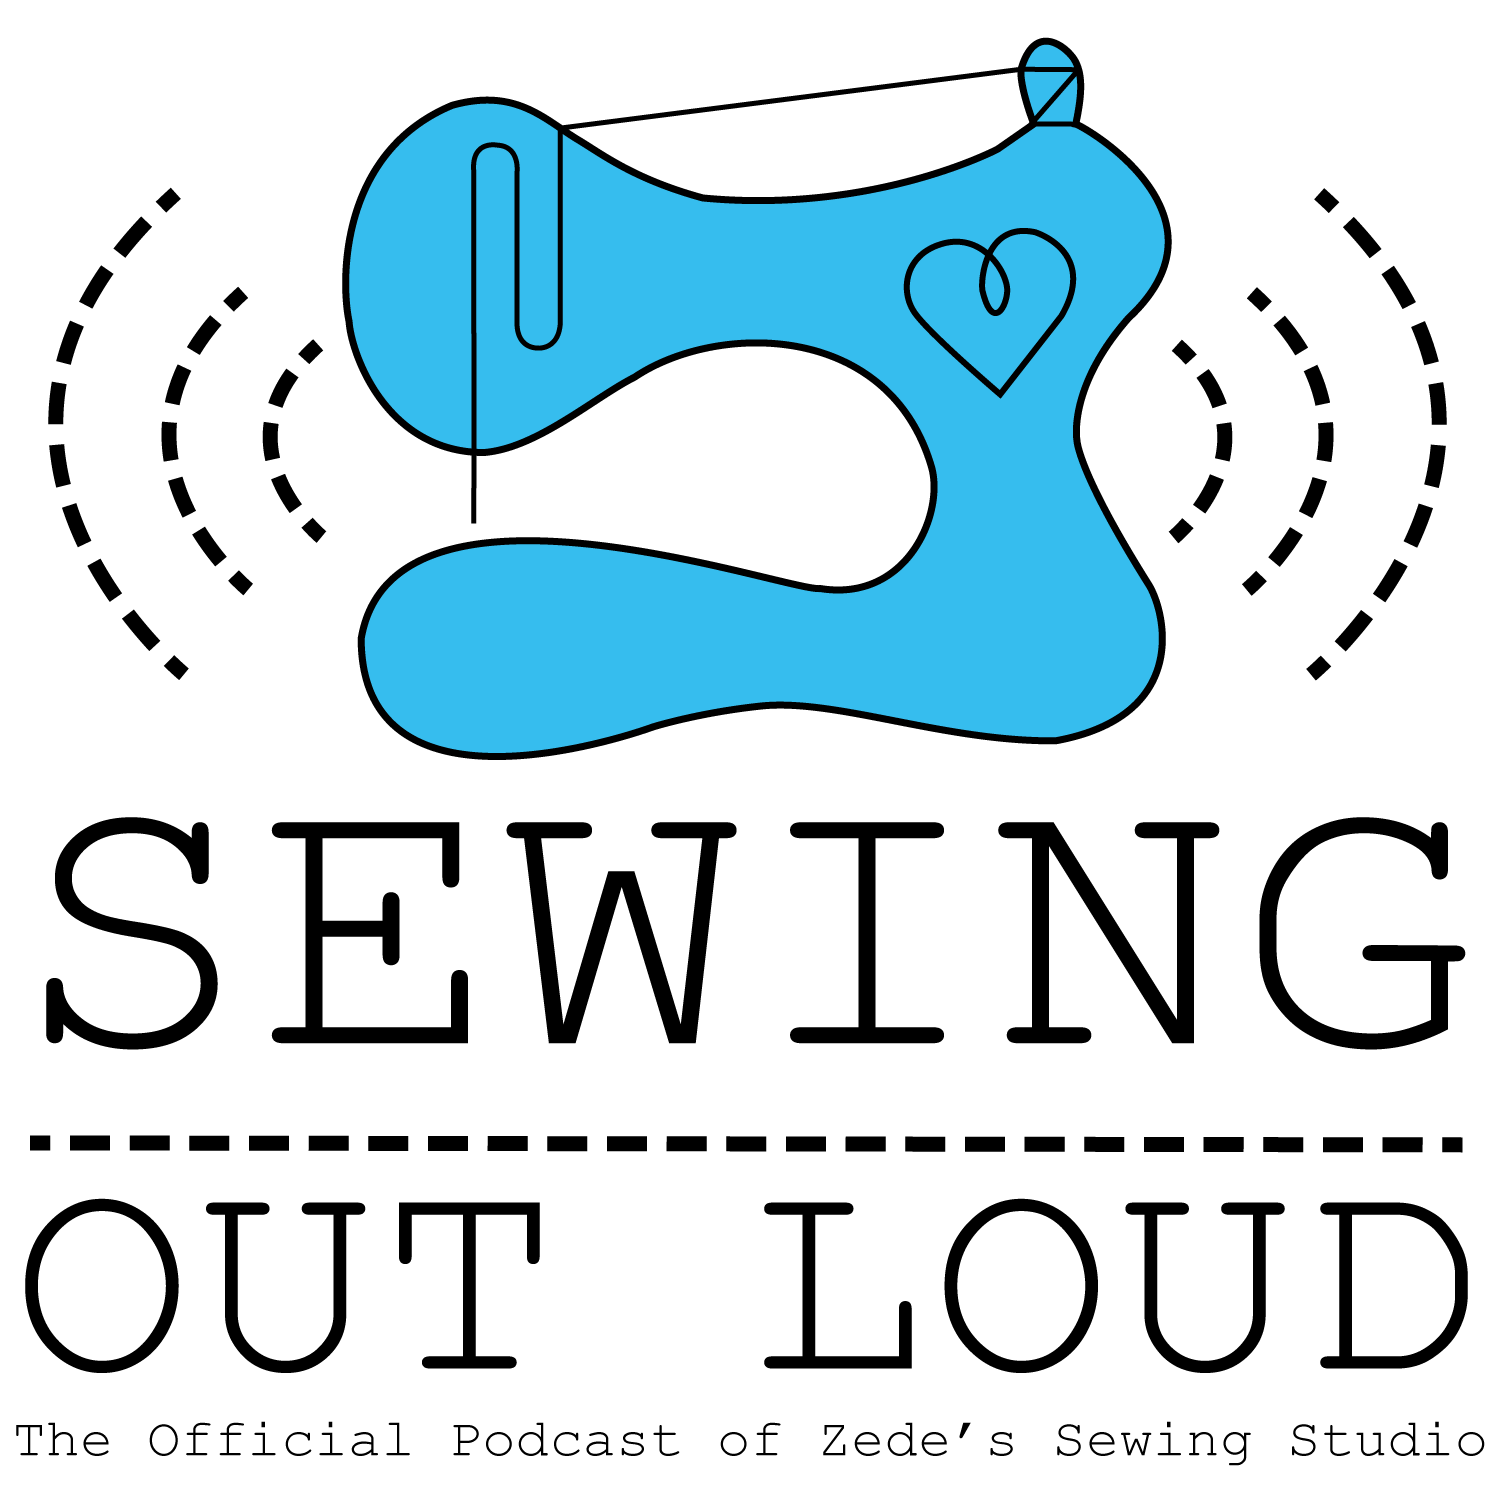 The 12 Days of Sewing Part 1